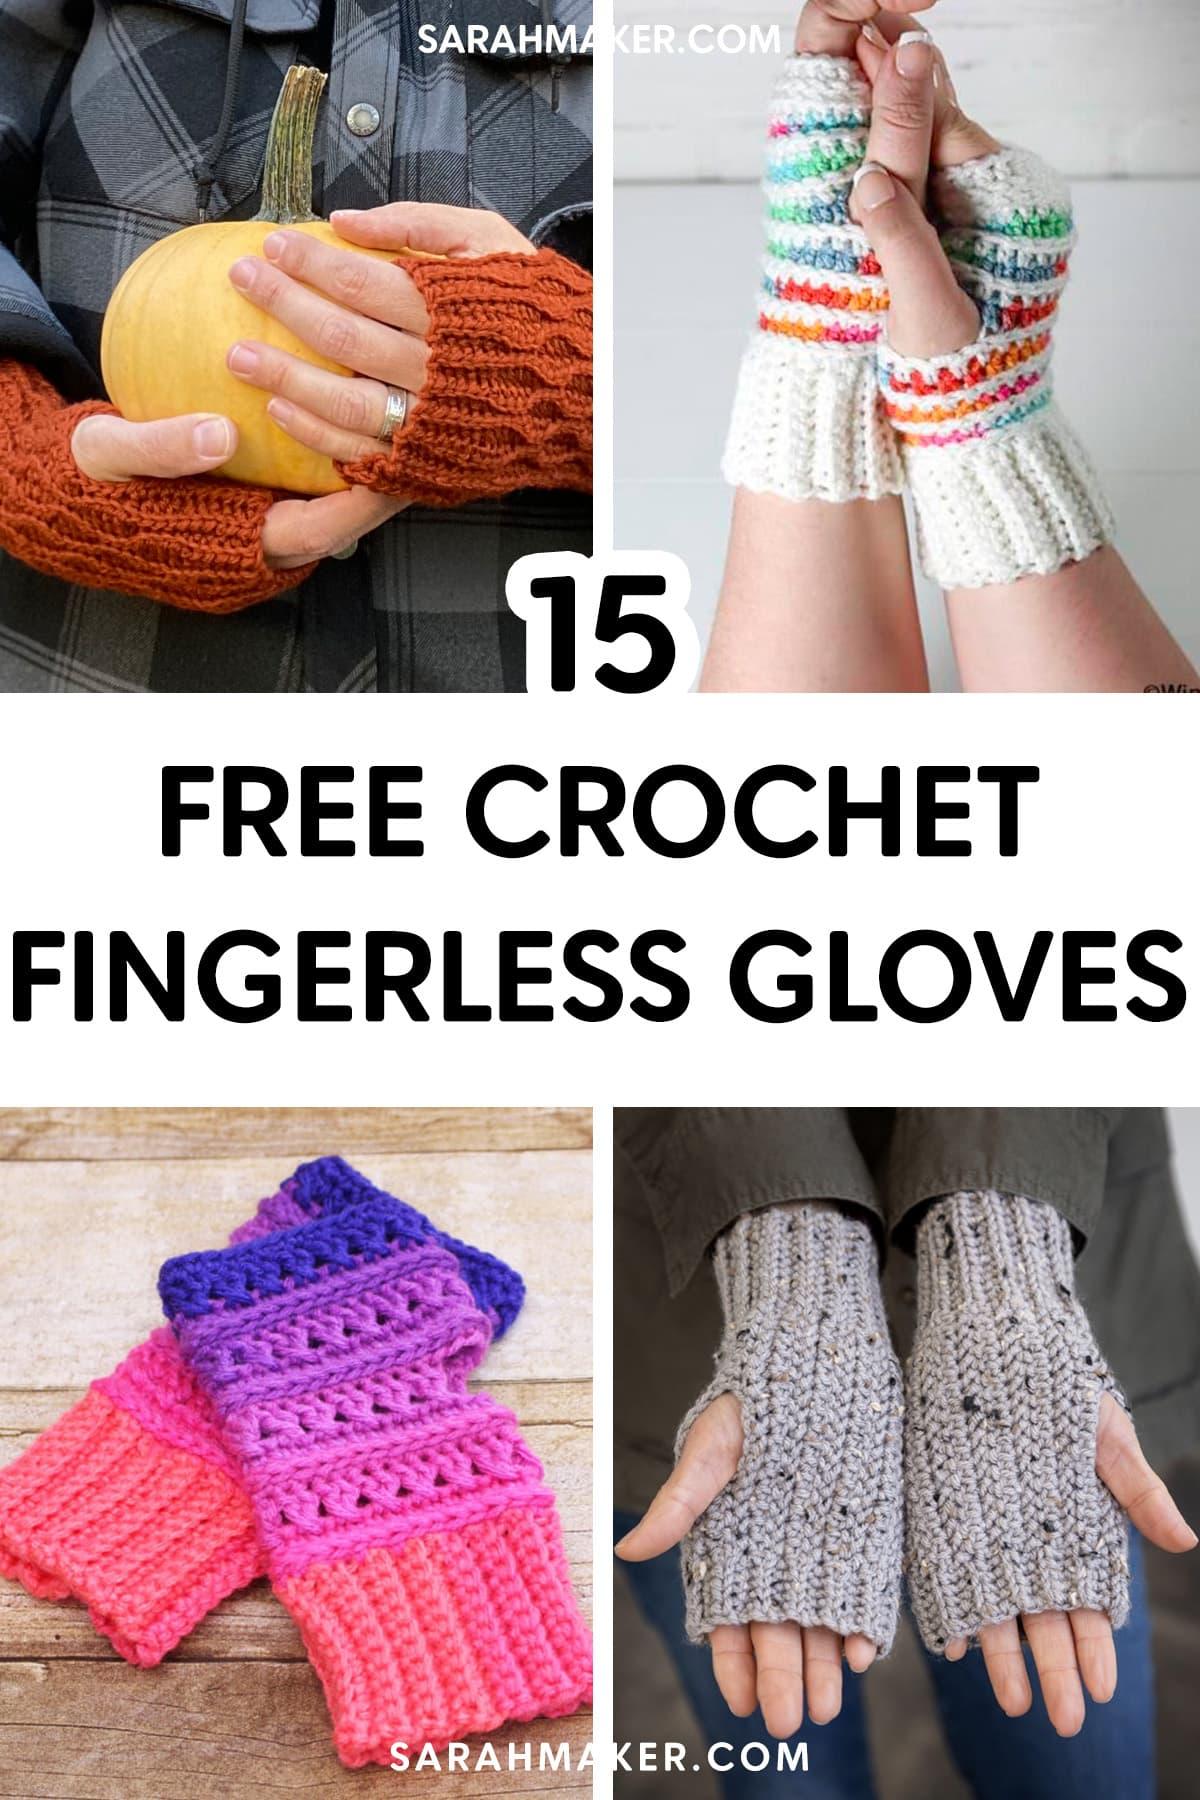 photo collage of crochet fingerless gloves with text overlay